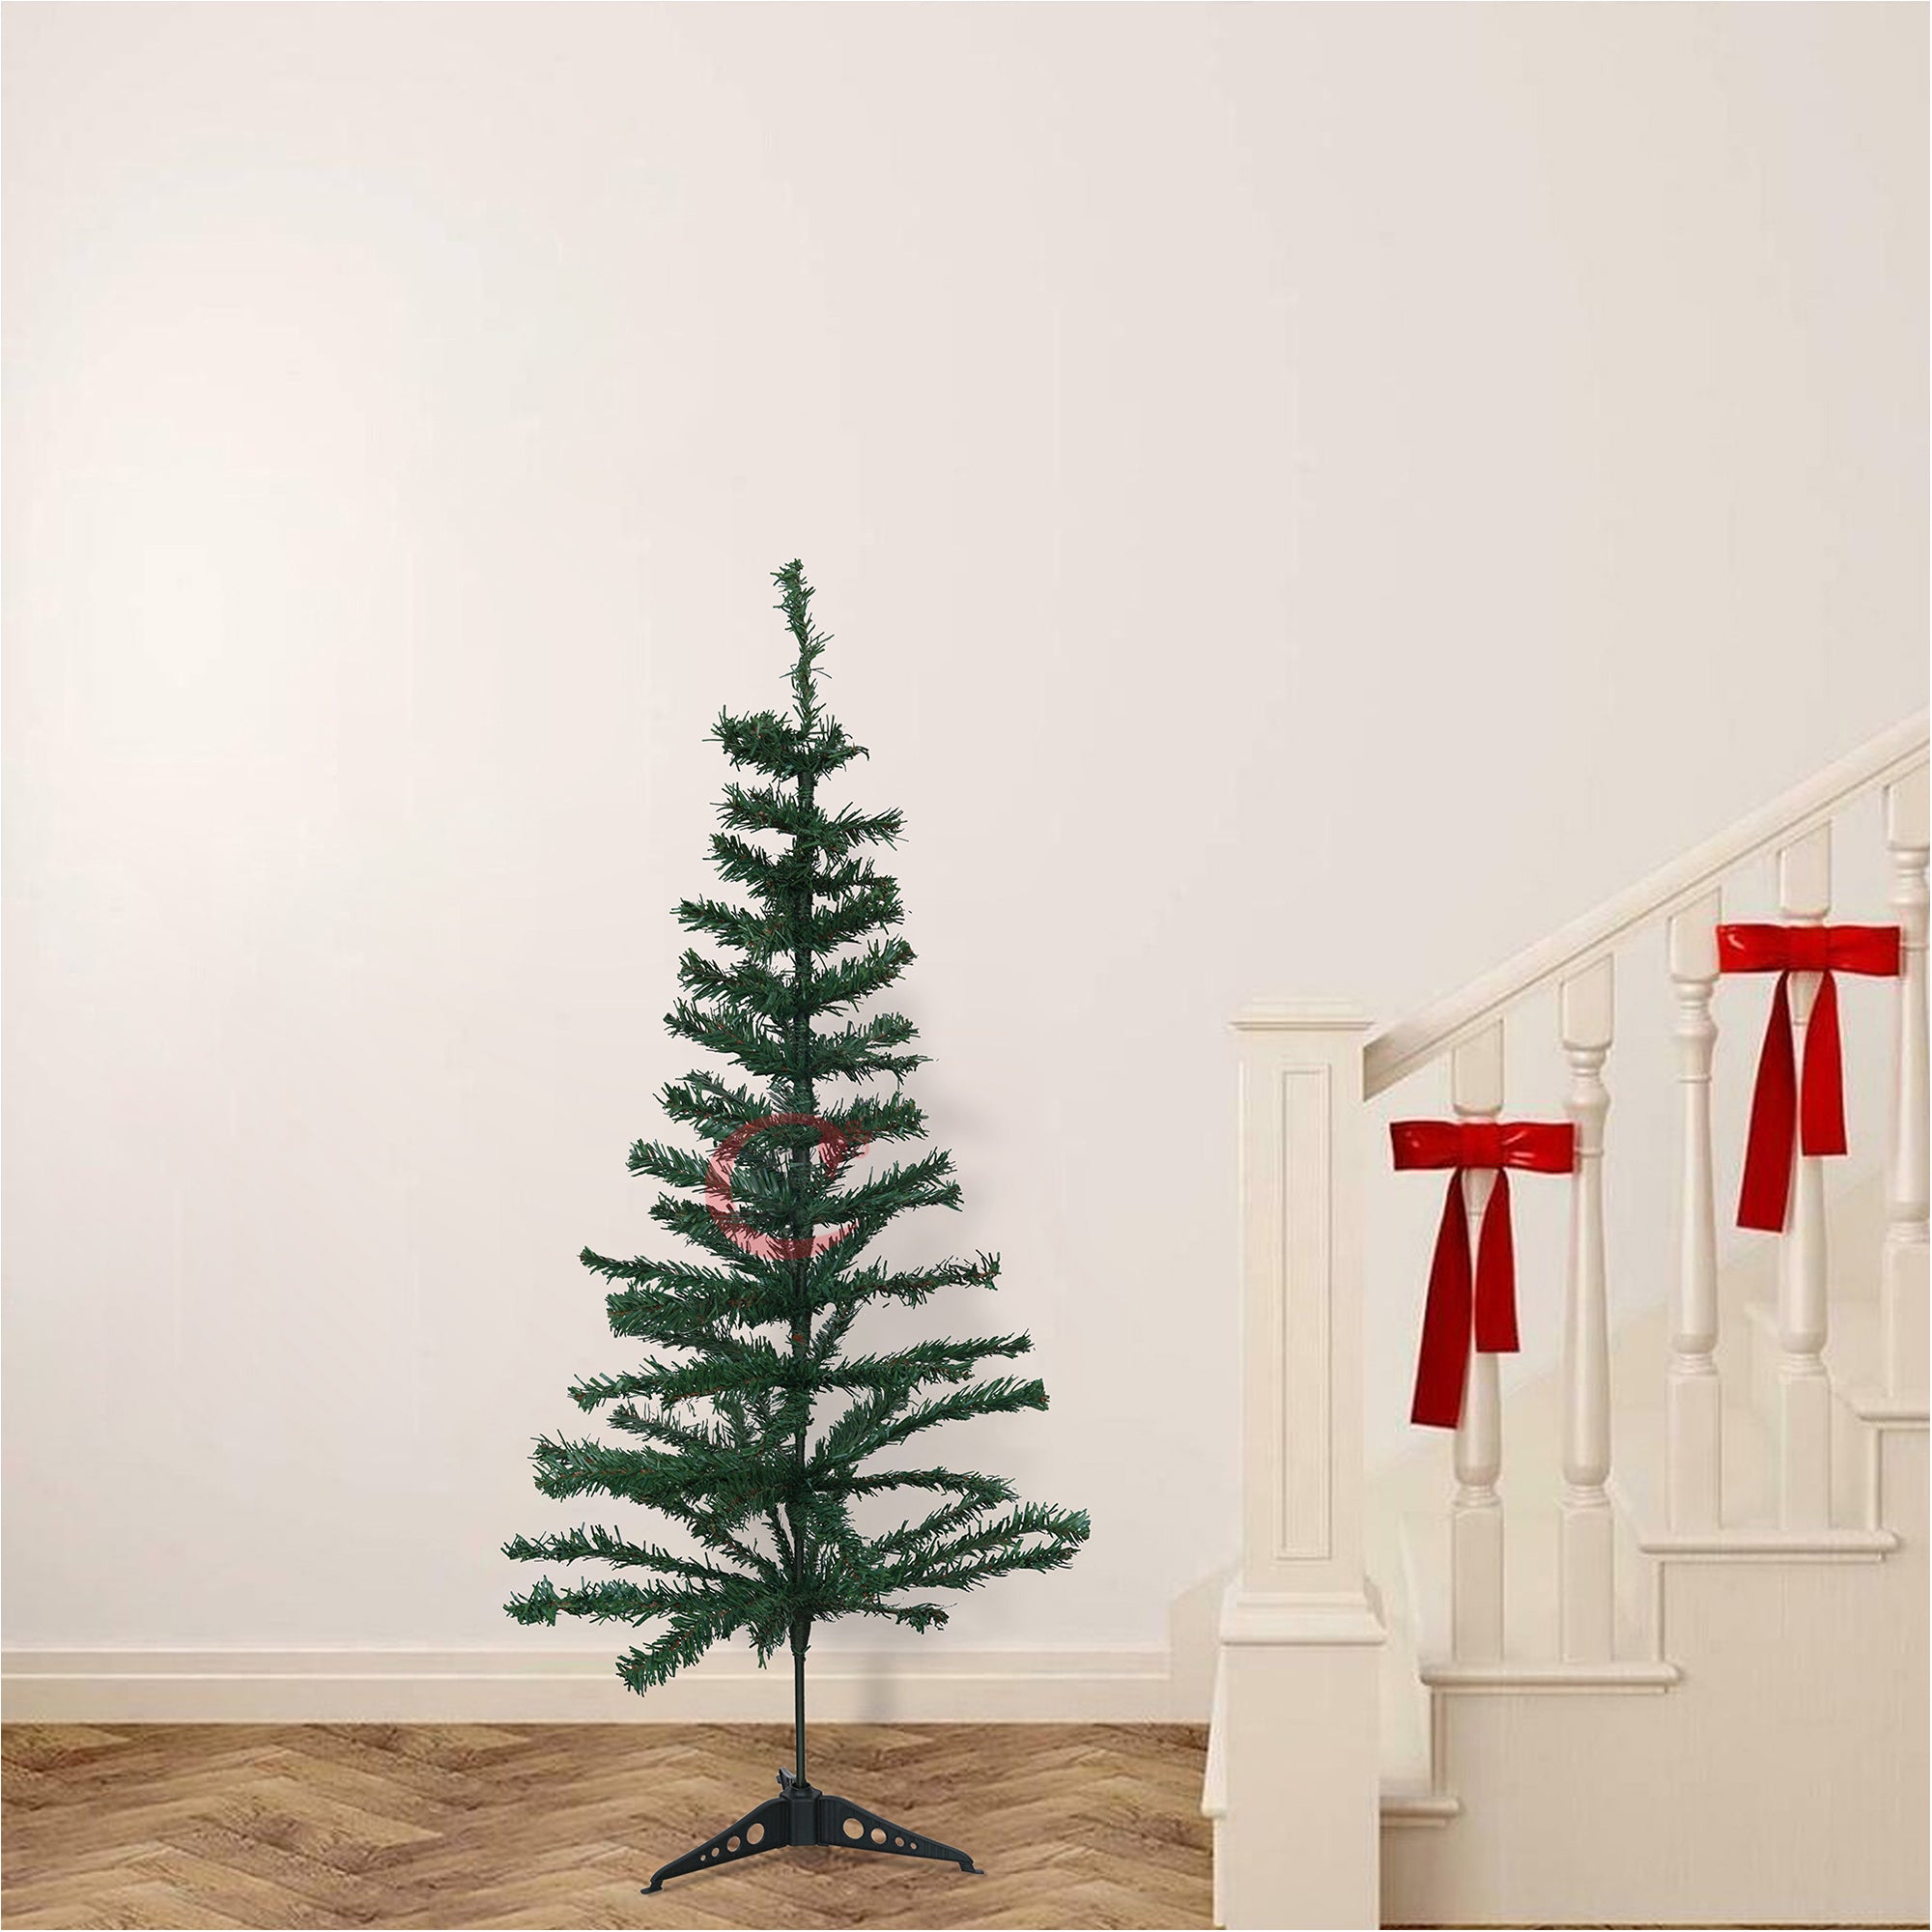 eCraftIndia 4 Feet Green Artificial Christmas Tree Xmas Pine Tree with Metal Stand - Xmas Tree for Indoor, Outdoor, Home, Living Room, Office, Church Decor - Merry Christmas Decoration Item… 1